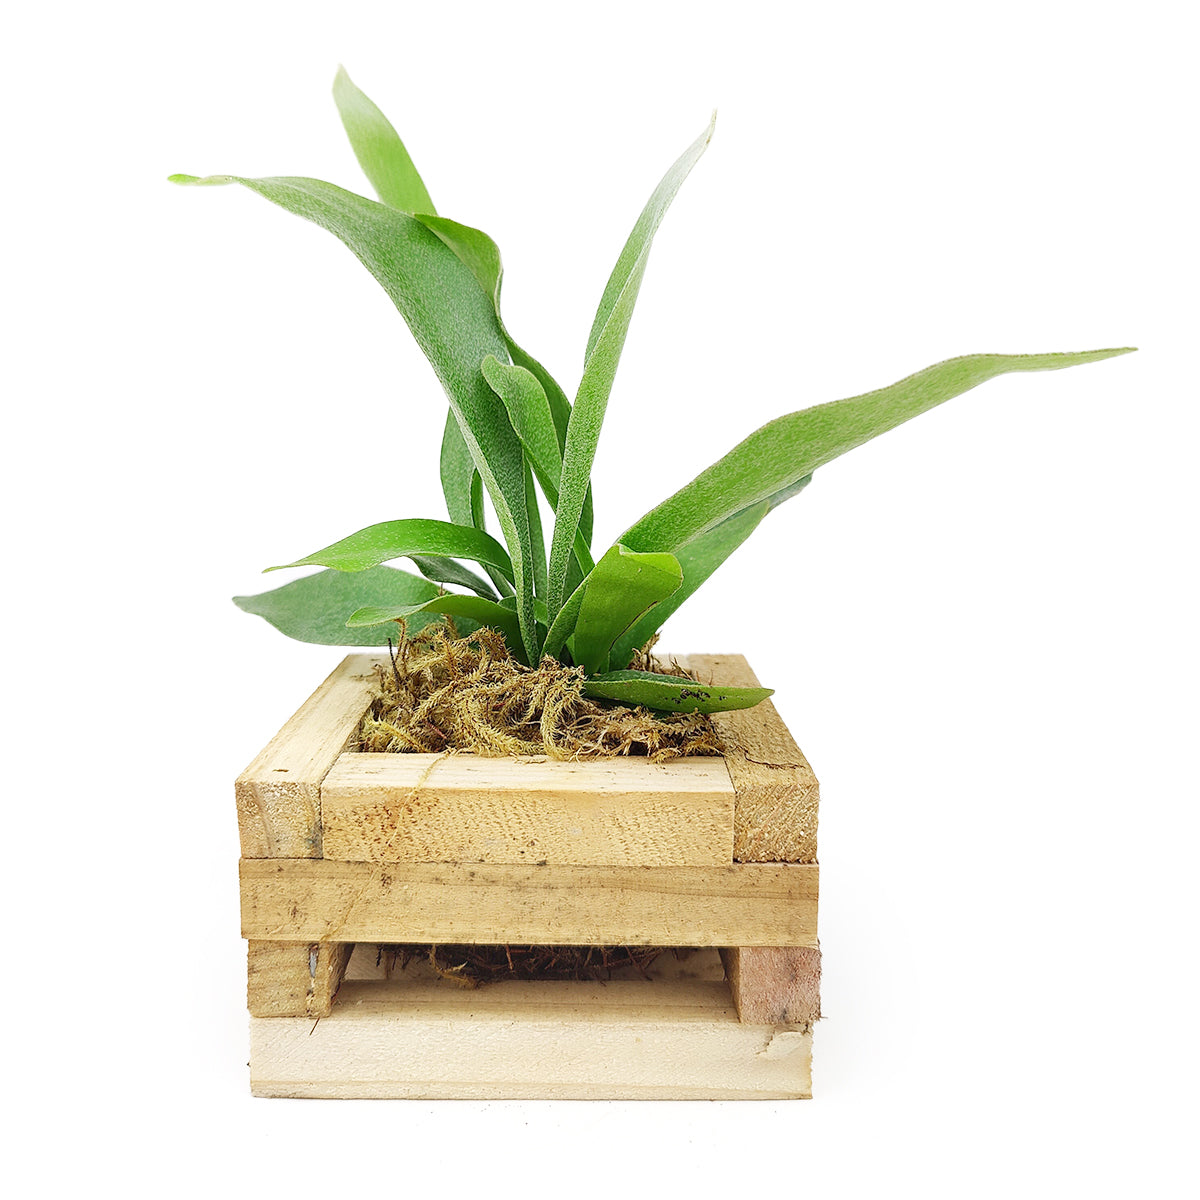 Small Staghorn Fern in Wood Planter, Succulent Gift Decor Ideas, buy Staghorn Fern online